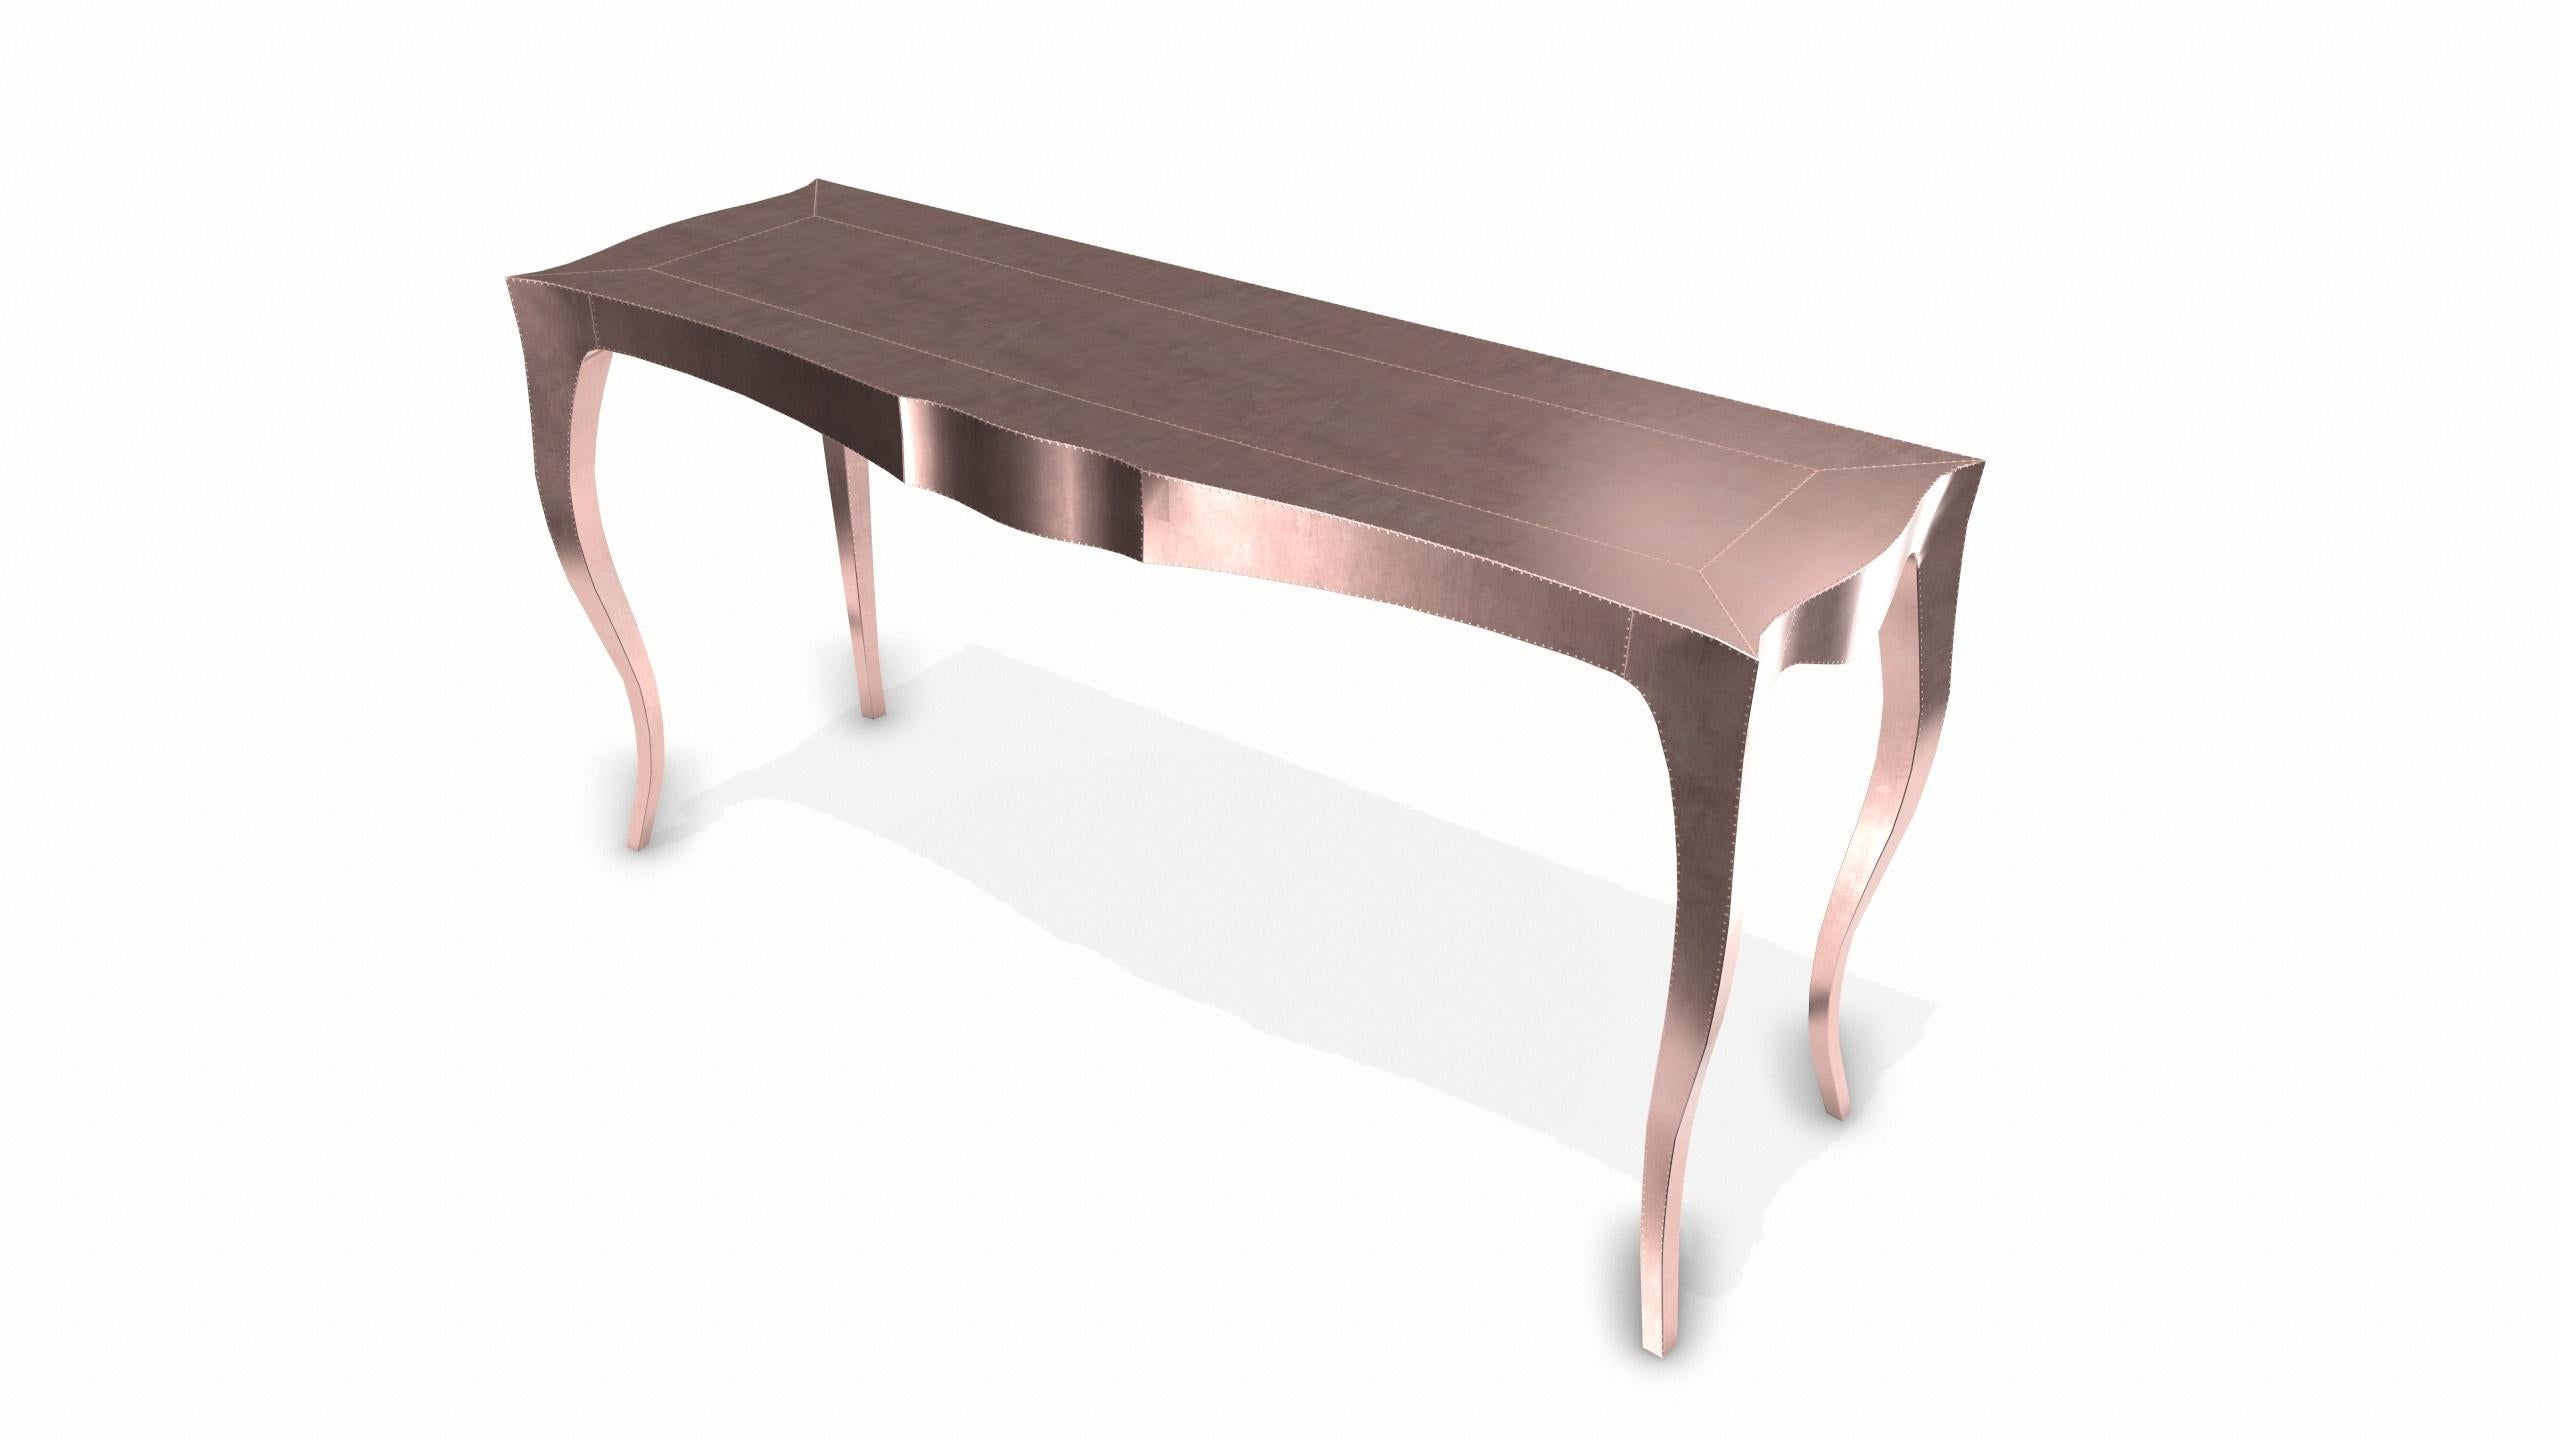 Other Louise Console Art Deco Industrial and Work Tables Smooth Copper by Paul Mathieu For Sale